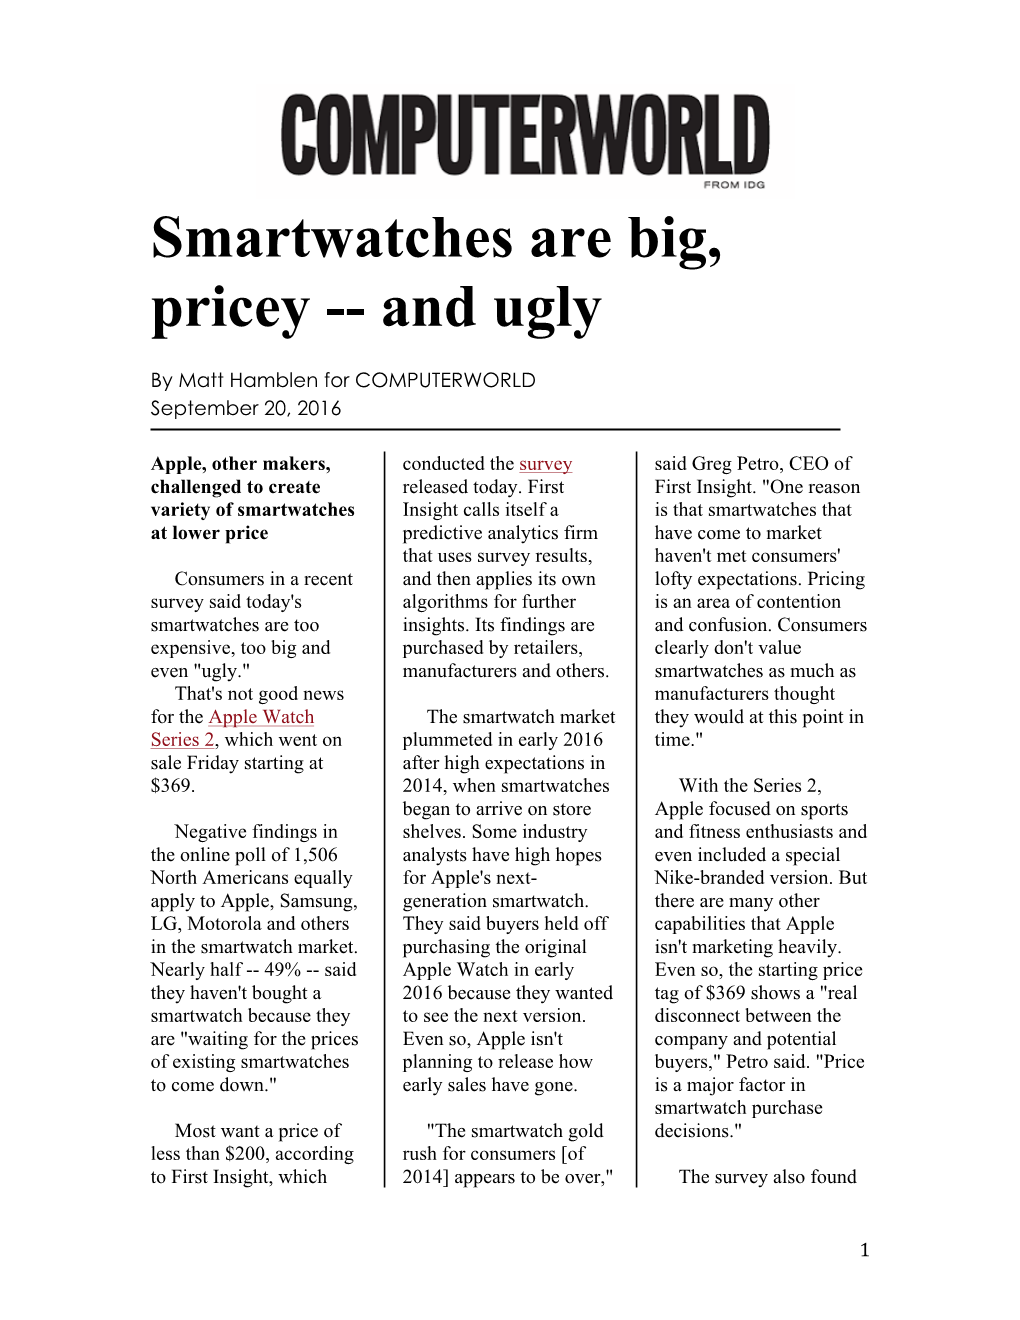 Smartwatches Are Big, Pricey -- and Ugly